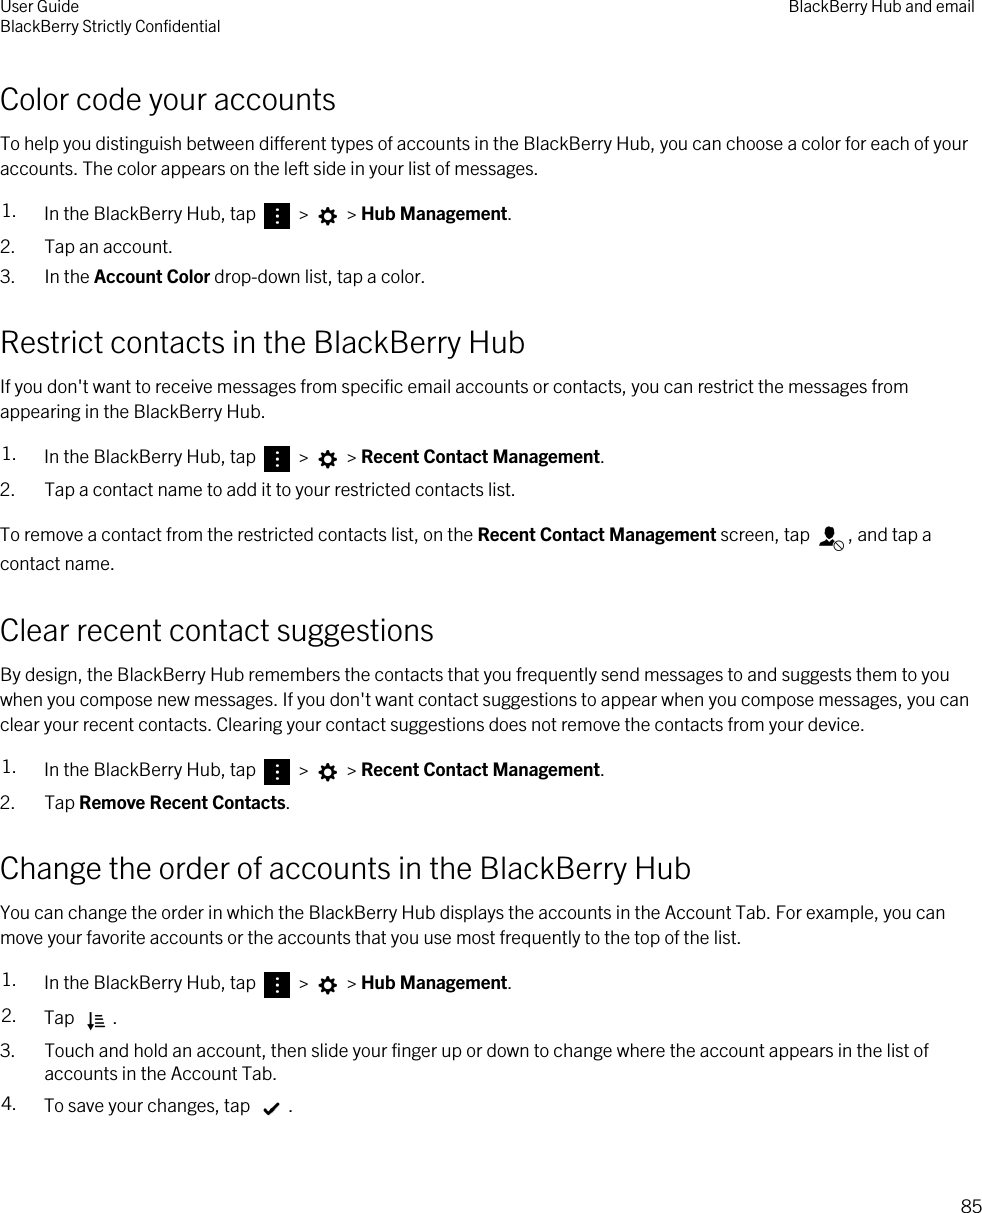 Color code your accountsTo help you distinguish between different types of accounts in the BlackBerry Hub, you can choose a color for each of your accounts. The color appears on the left side in your list of messages.1. In the BlackBerry Hub, tap   &gt;   &gt; Hub Management.2. Tap an account.3. In the Account Color drop-down list, tap a color.Restrict contacts in the BlackBerry HubIf you don&apos;t want to receive messages from specific email accounts or contacts, you can restrict the messages from appearing in the BlackBerry Hub.1. In the BlackBerry Hub, tap   &gt;   &gt; Recent Contact Management.2. Tap a contact name to add it to your restricted contacts list.To remove a contact from the restricted contacts list, on the Recent Contact Management screen, tap  , and tap a contact name.Clear recent contact suggestionsBy design, the BlackBerry Hub remembers the contacts that you frequently send messages to and suggests them to you when you compose new messages. If you don&apos;t want contact suggestions to appear when you compose messages, you can clear your recent contacts. Clearing your contact suggestions does not remove the contacts from your device.1. In the BlackBerry Hub, tap   &gt;   &gt; Recent Contact Management.2. Tap Remove Recent Contacts.Change the order of accounts in the BlackBerry HubYou can change the order in which the BlackBerry Hub displays the accounts in the Account Tab. For example, you can move your favorite accounts or the accounts that you use most frequently to the top of the list.1. In the BlackBerry Hub, tap   &gt;   &gt; Hub Management.2. Tap  .3. Touch and hold an account, then slide your finger up or down to change where the account appears in the list of accounts in the Account Tab.4. To save your changes, tap  .User GuideBlackBerry Strictly Confidential BlackBerry Hub and email85